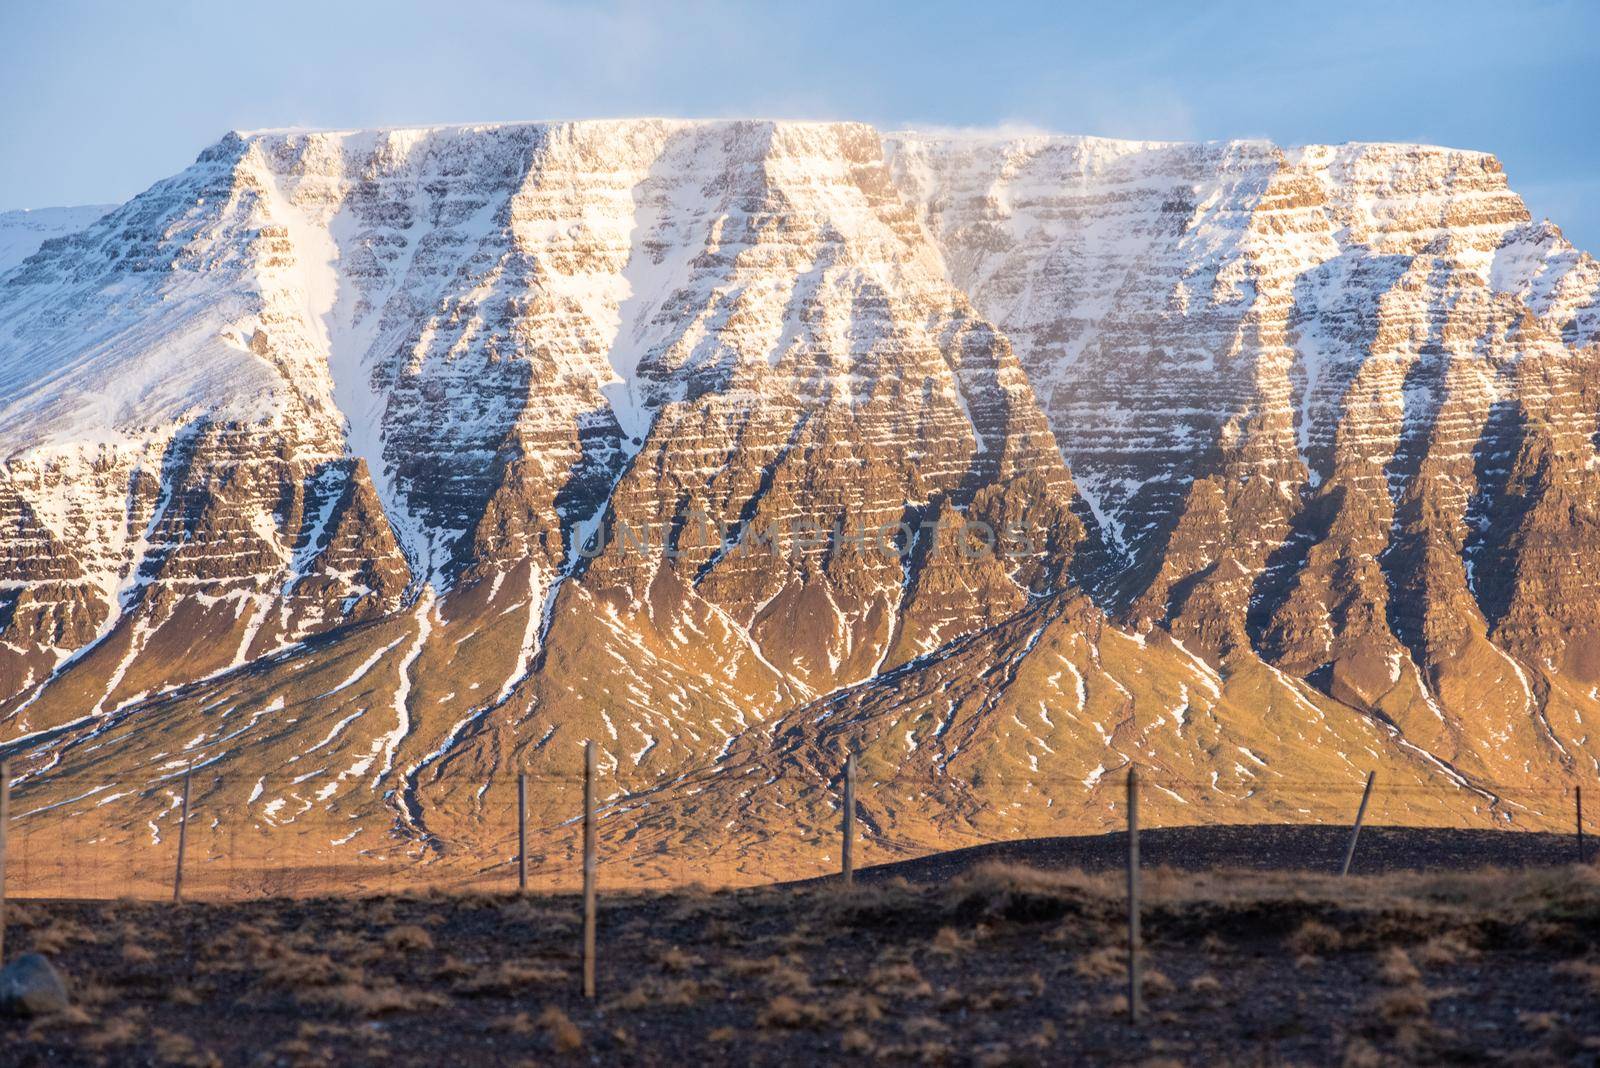 Golden hour lighting geological phenomenon in Iceland snow capped mountain wind blowing freezing texture layers landscape cliff edges wow by jyurinko